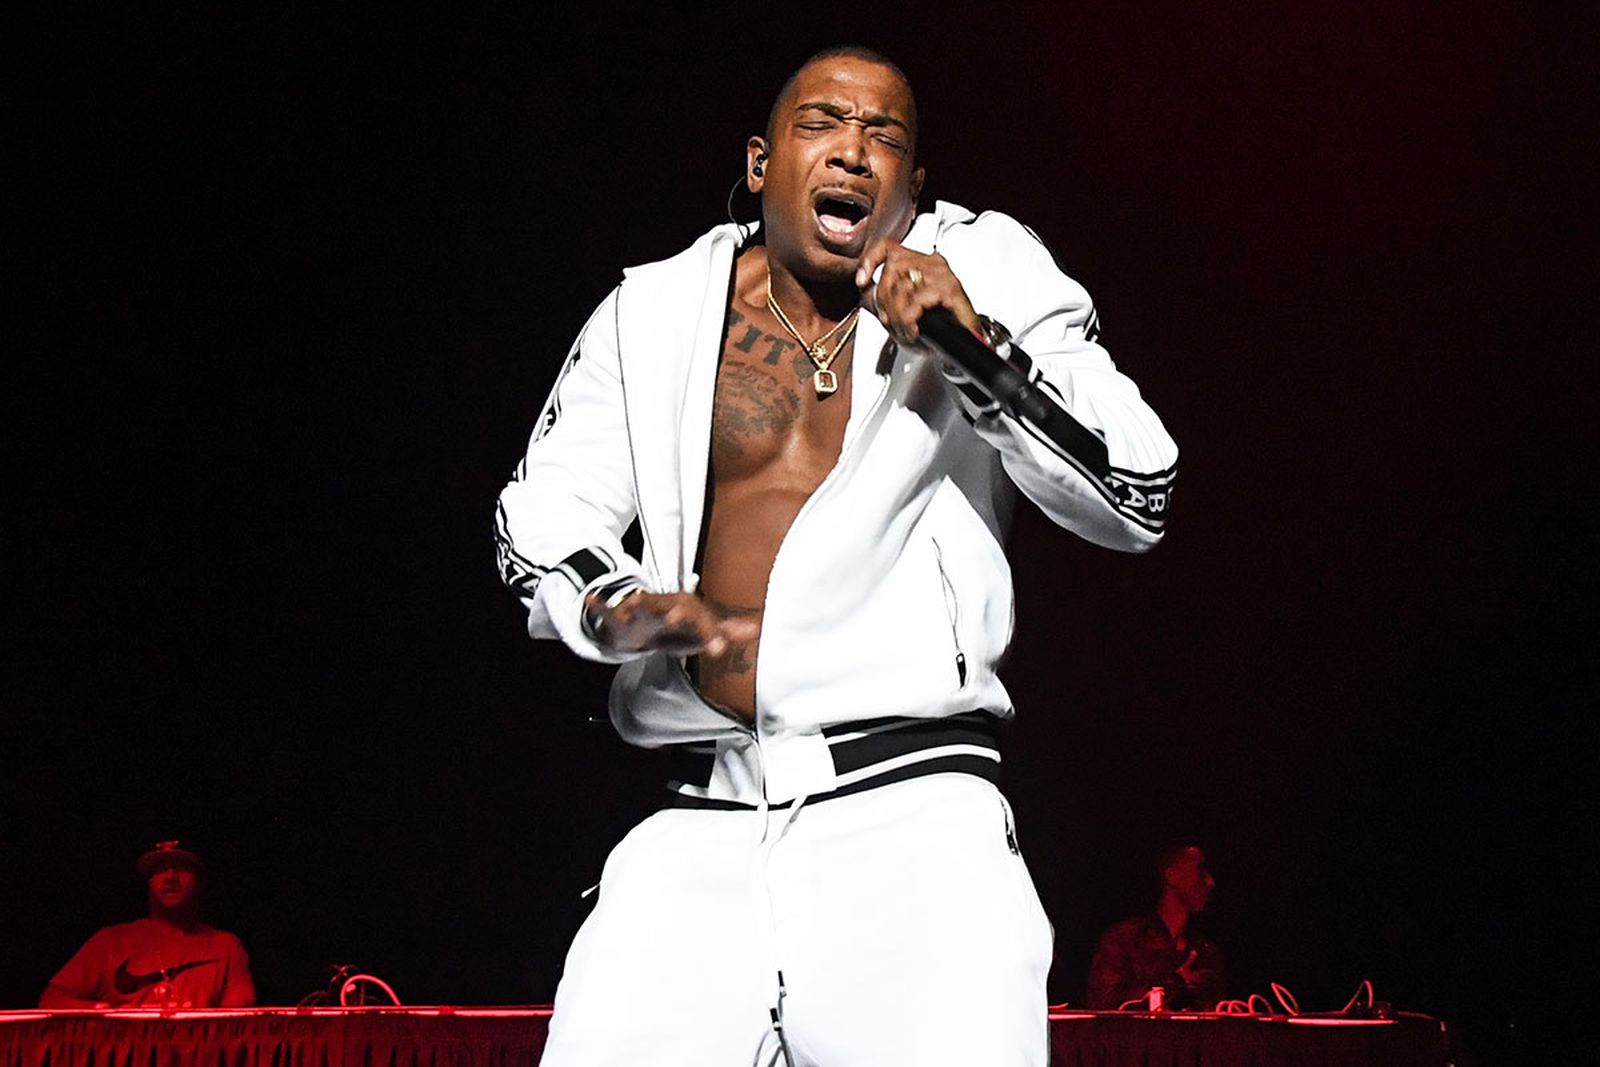 J Rule performs on stage in white tracksuit